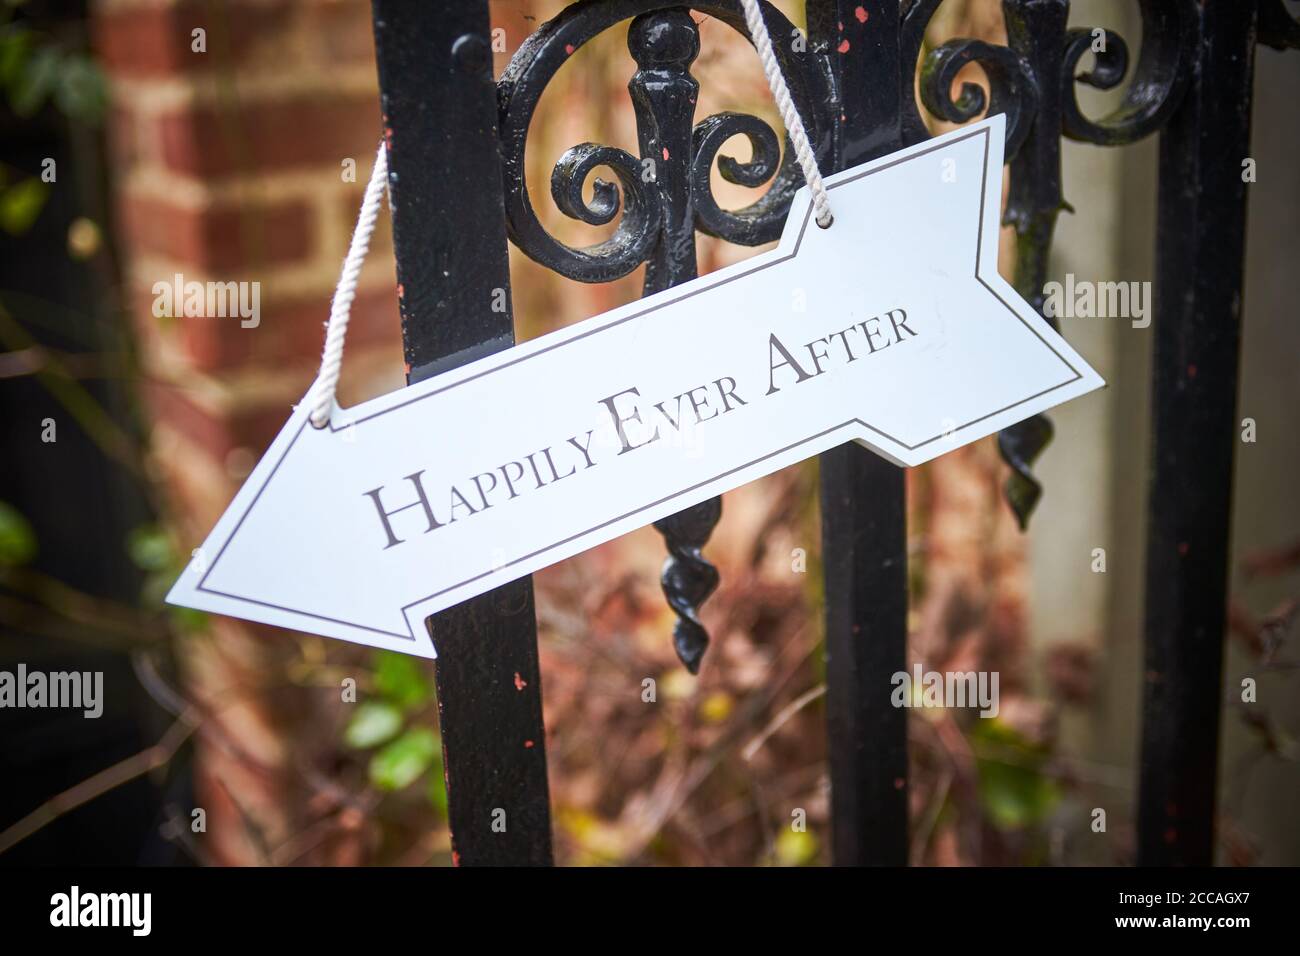 Sign for a wedding reception reading Happily Ever After Stock Photo